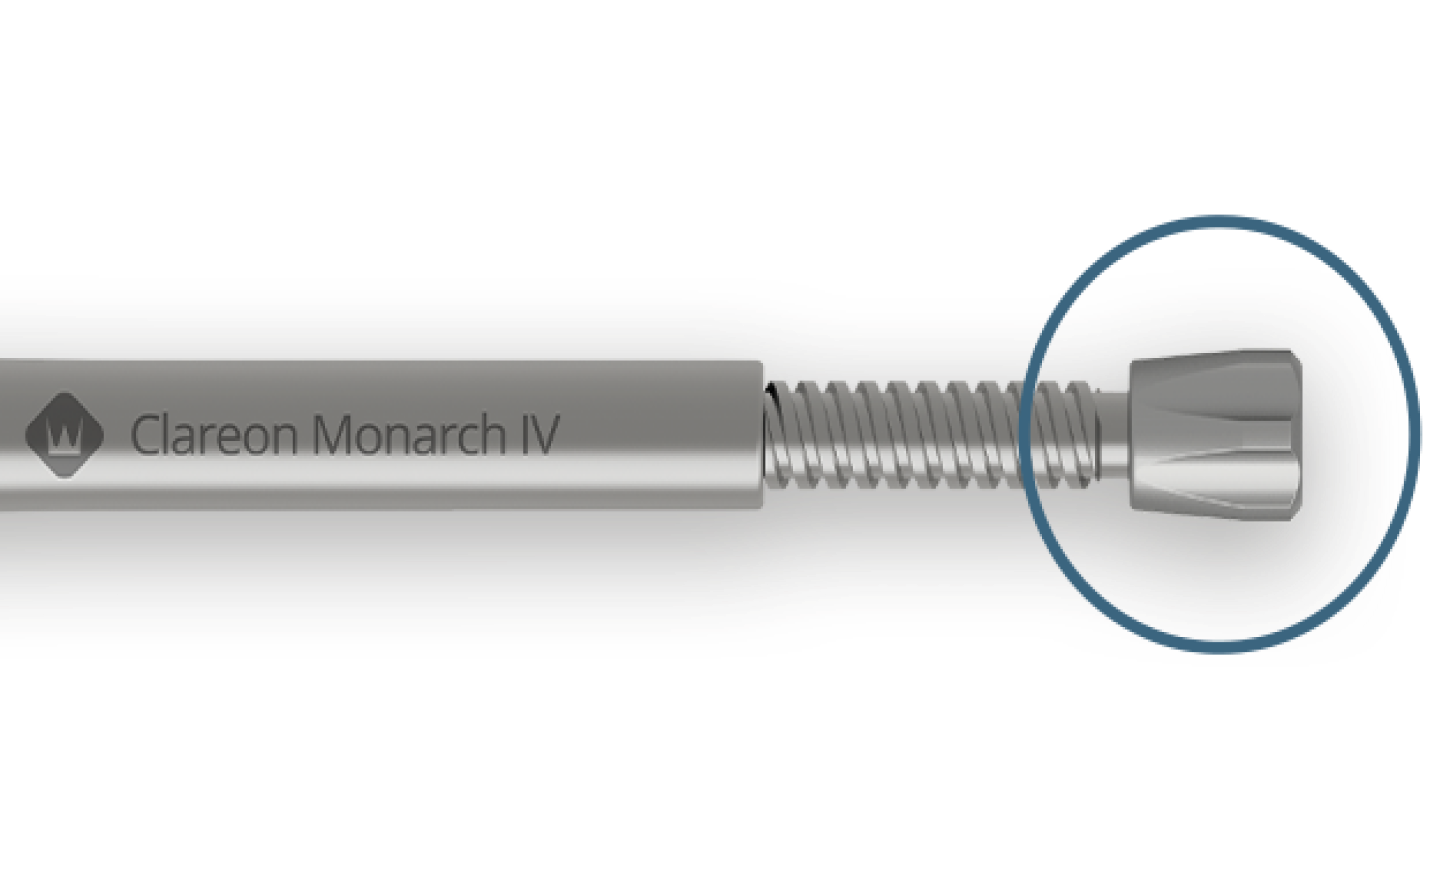 Clareon Monarch IV Handpiece sits horizontally. A blue circle is placed on the enlarged twist knob to draw focus.